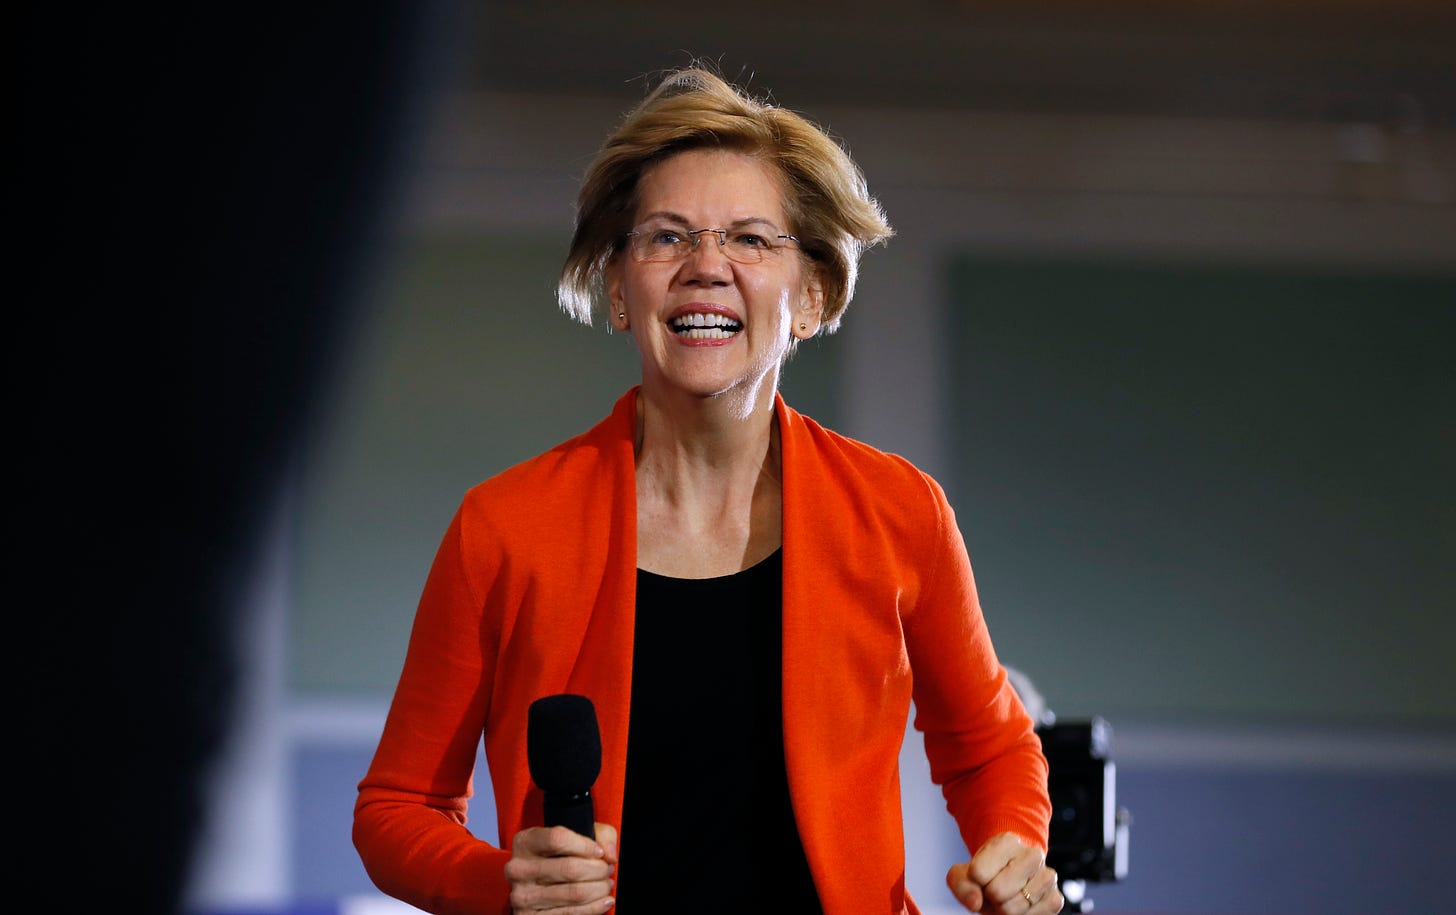 Is Elizabeth Warren 'angry' and antagonistic? Or are rivals dabbling in  gendered criticism? - The Washington Post